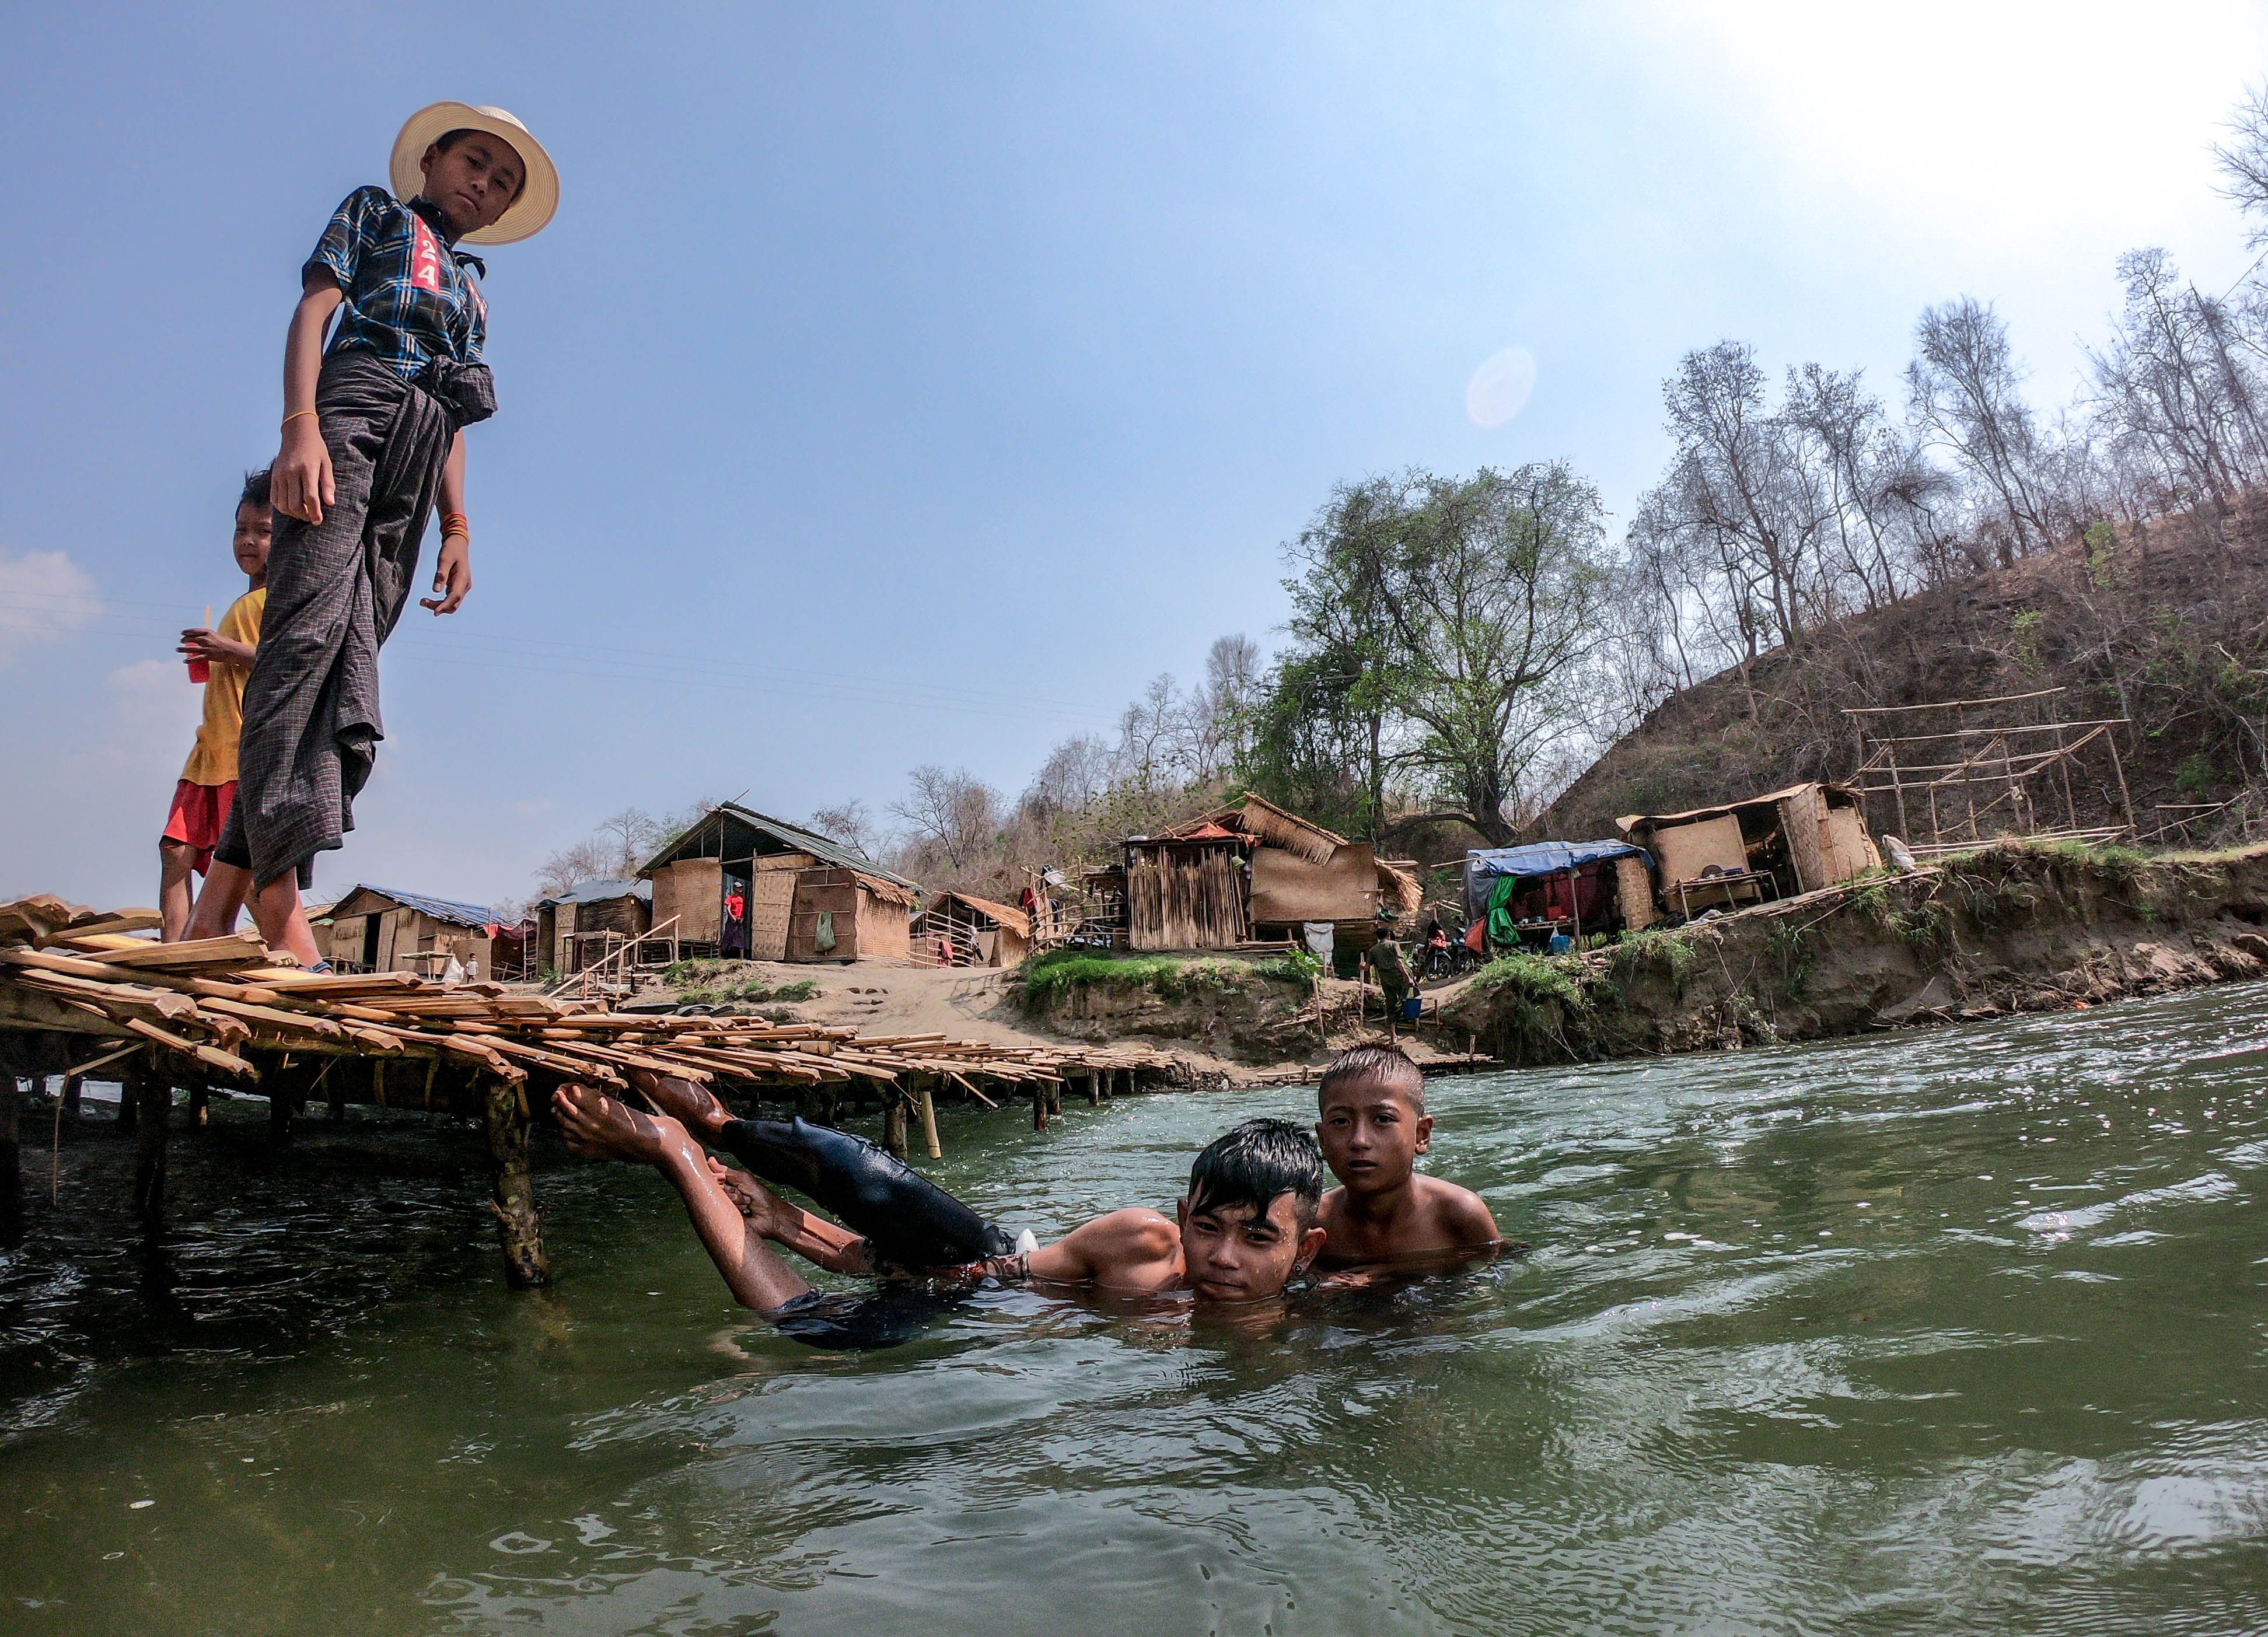 For more than a mile, small huts line the river, partitioned off by bamboo bridges creating numerous self-contained swimming areas. (Dominic Horner)